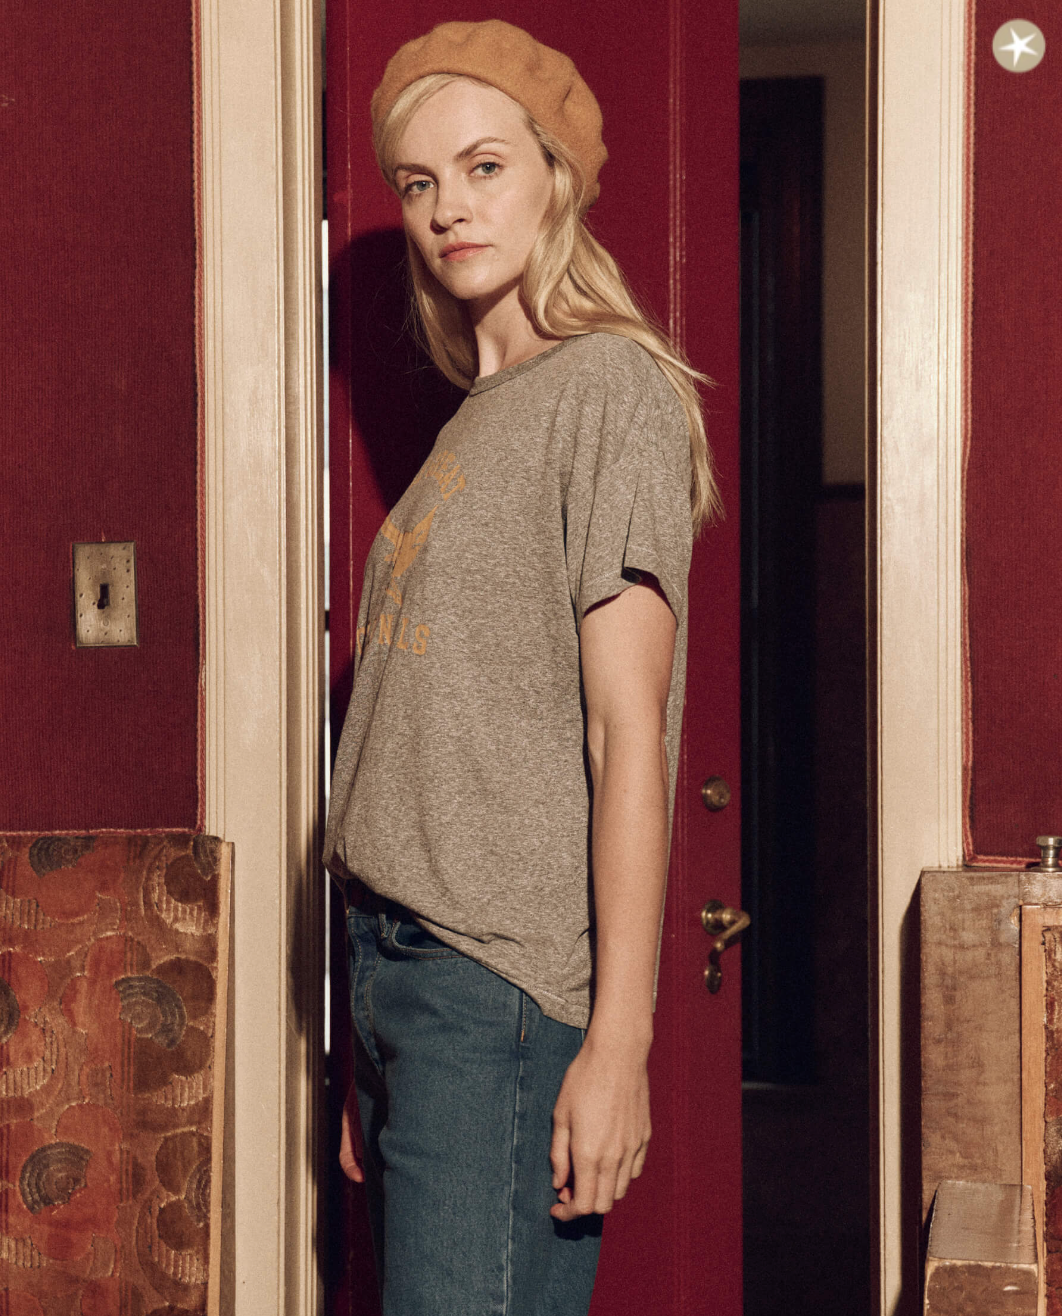 A young woman in a casual grey The Boxy Crew w/ Perched Cardinal t-shirt and blue jeans, wearing a mustard beret, stands in the doorway of a Scottsdale bungalow with maroon walls. She poses with a gentle gaze directed off-camera.